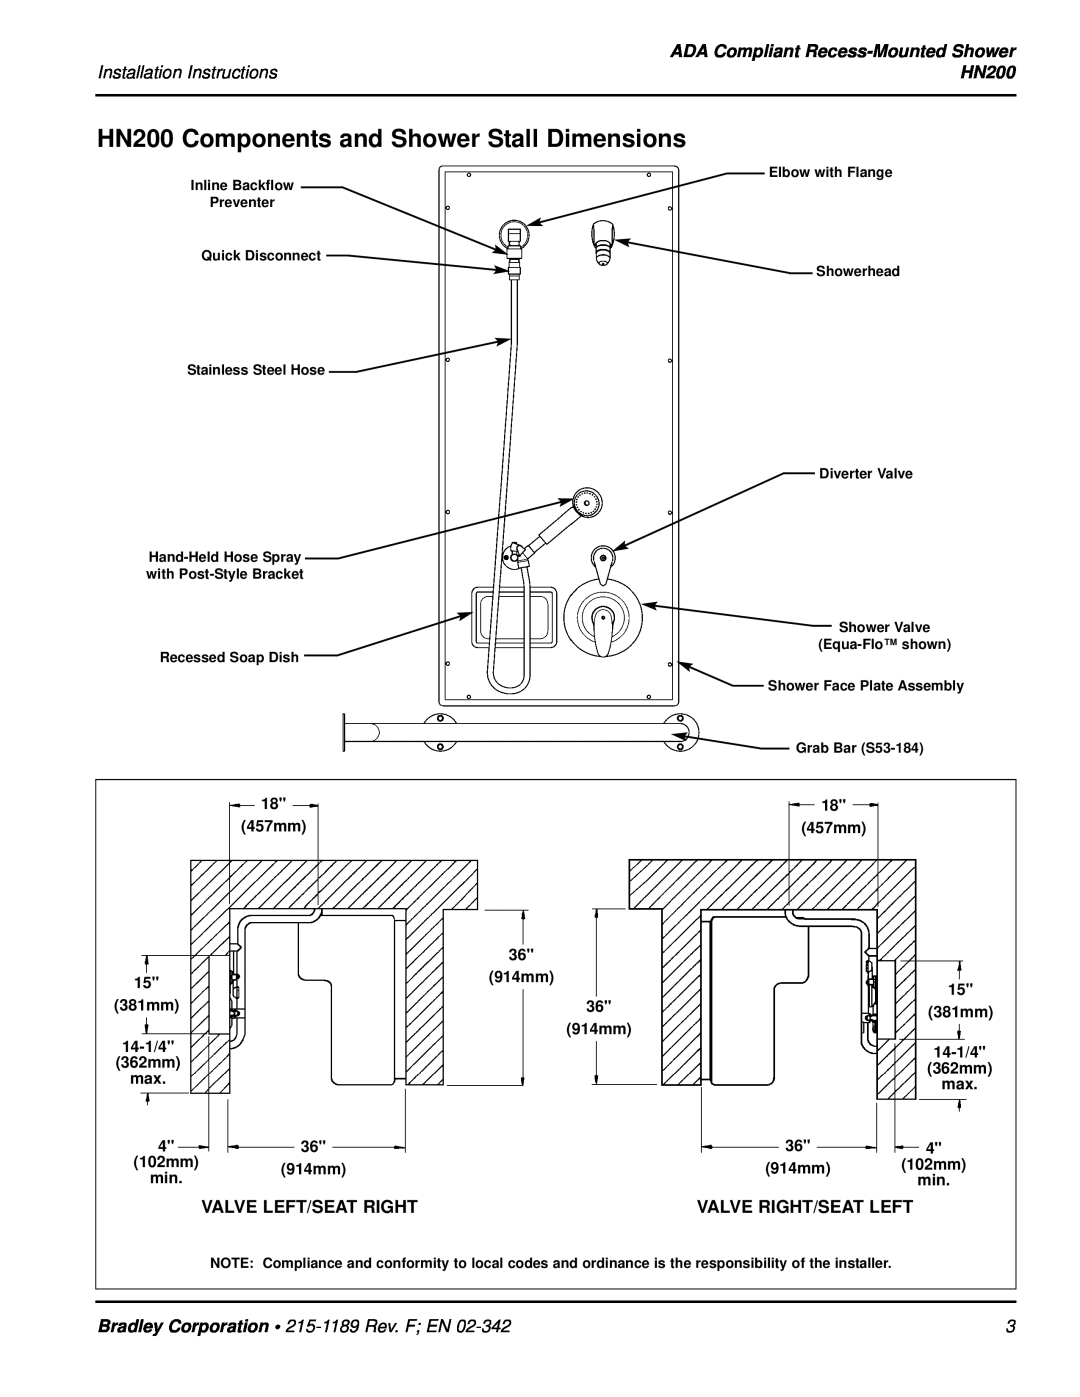 Bradley Smoker HN200 Components and Shower Stall Dimensions, ADA Compliant Recess-Mounted Shower, Valve Left/Seat Right 